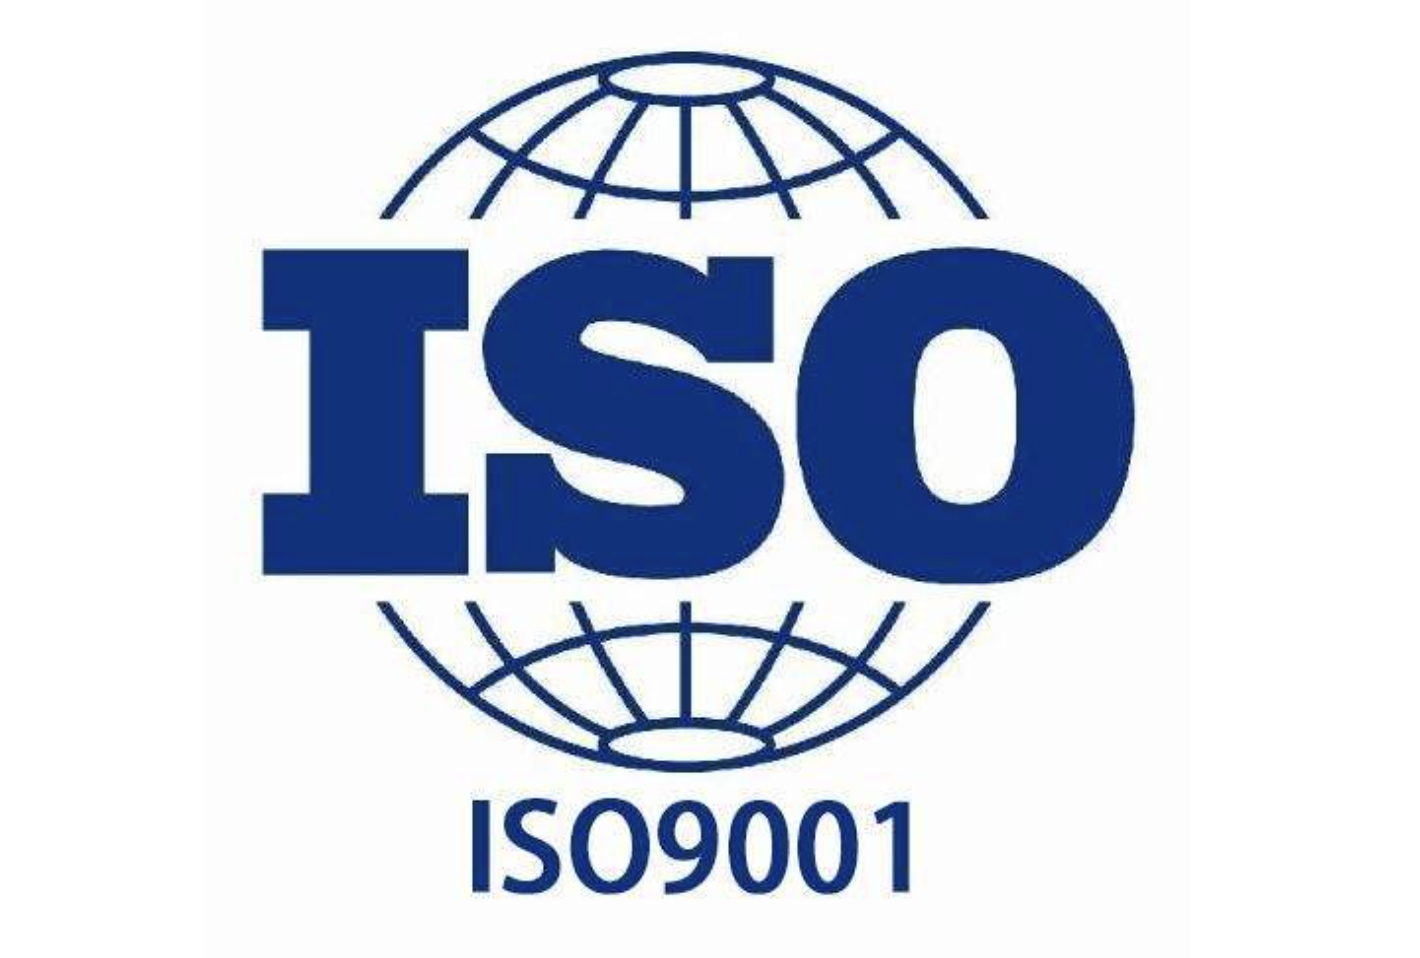 Nanjing Kemicl successfully passed the ISO9001